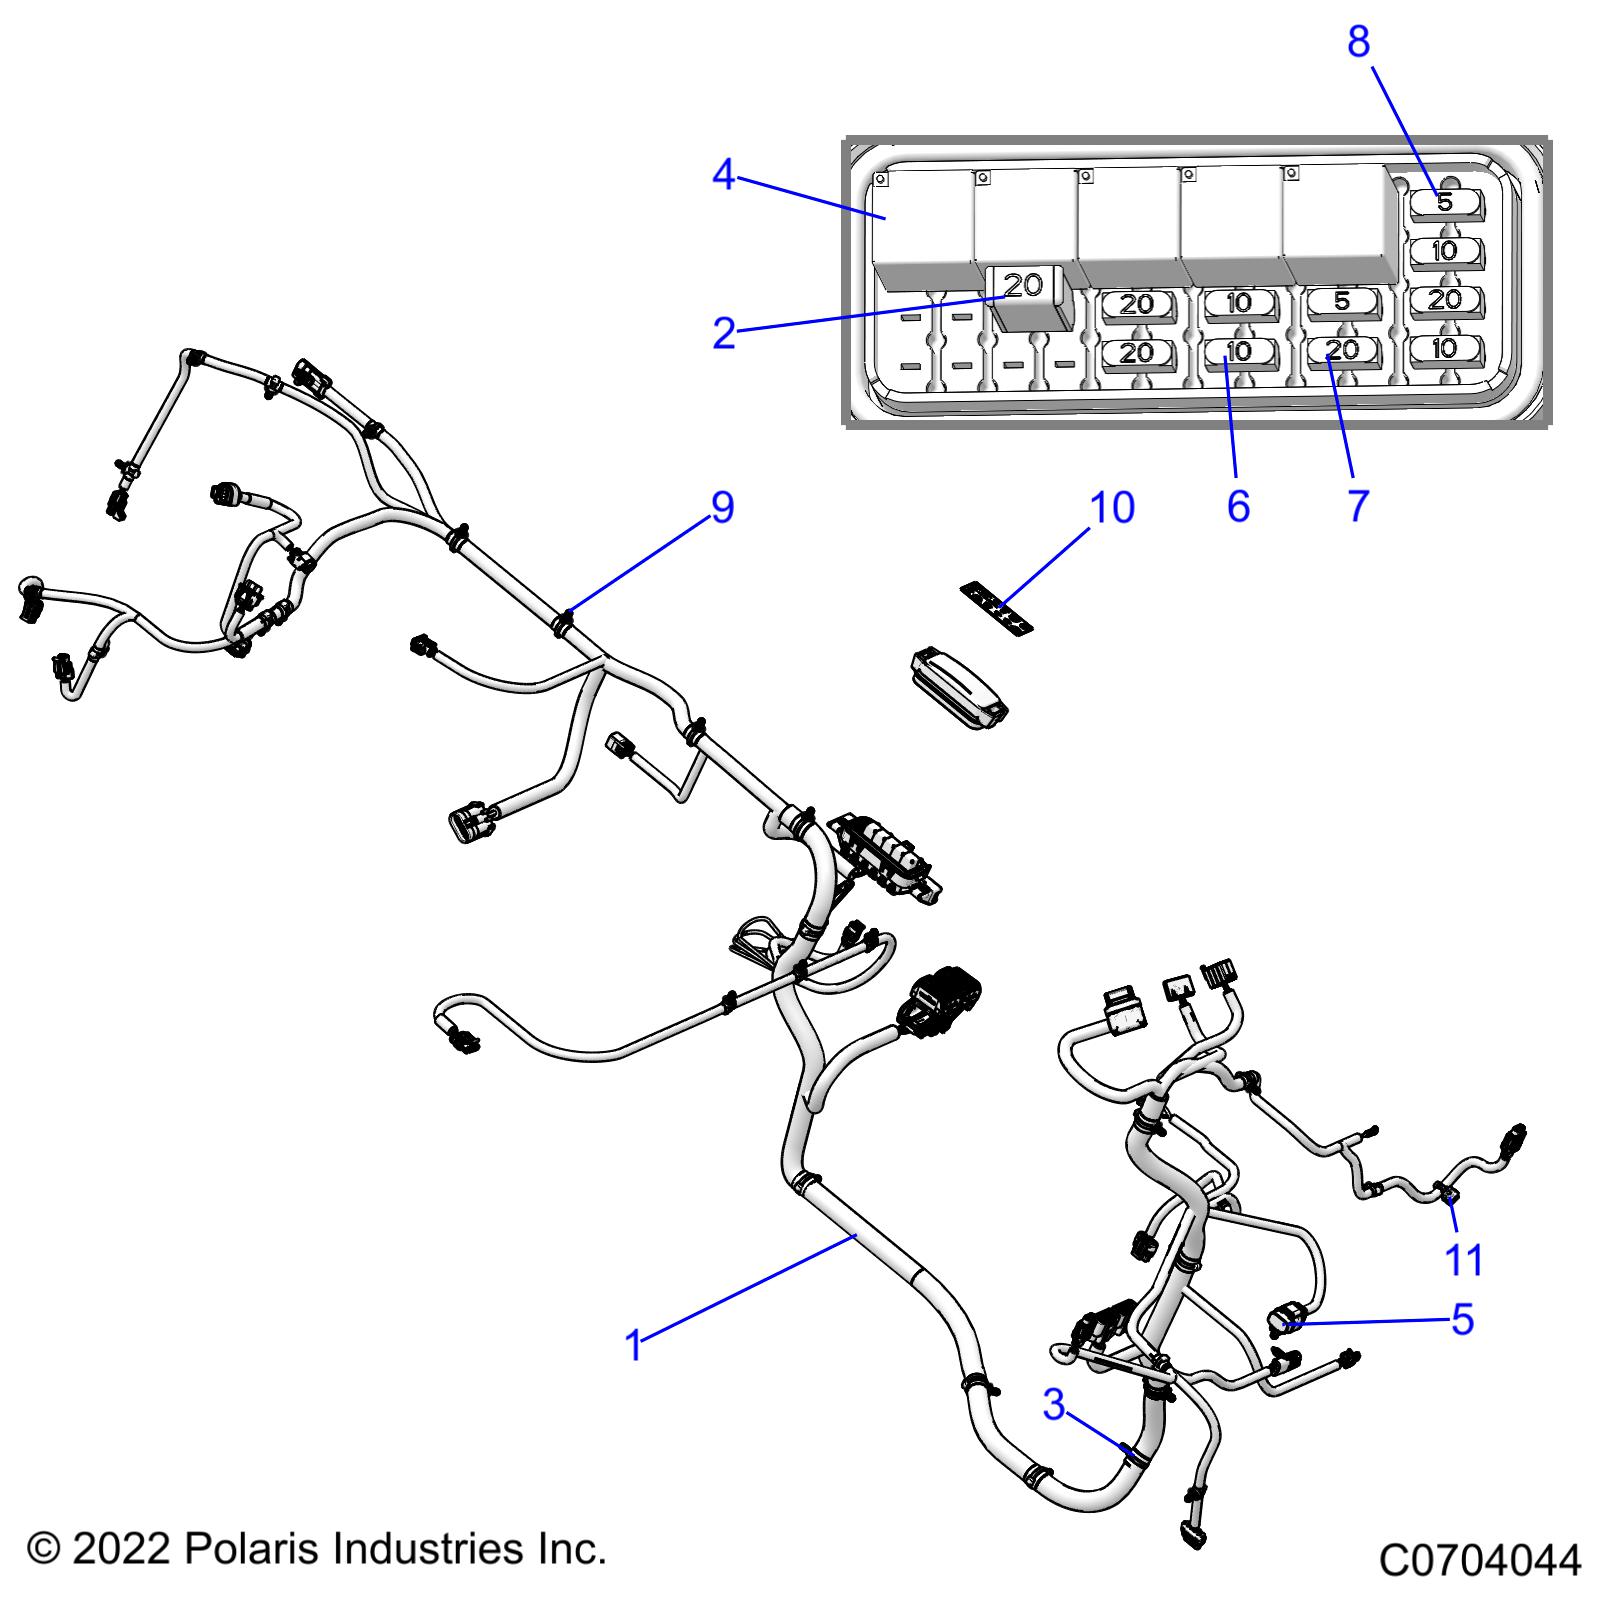 Part Number : 2414989 CHASSIS HARNESS  CREW